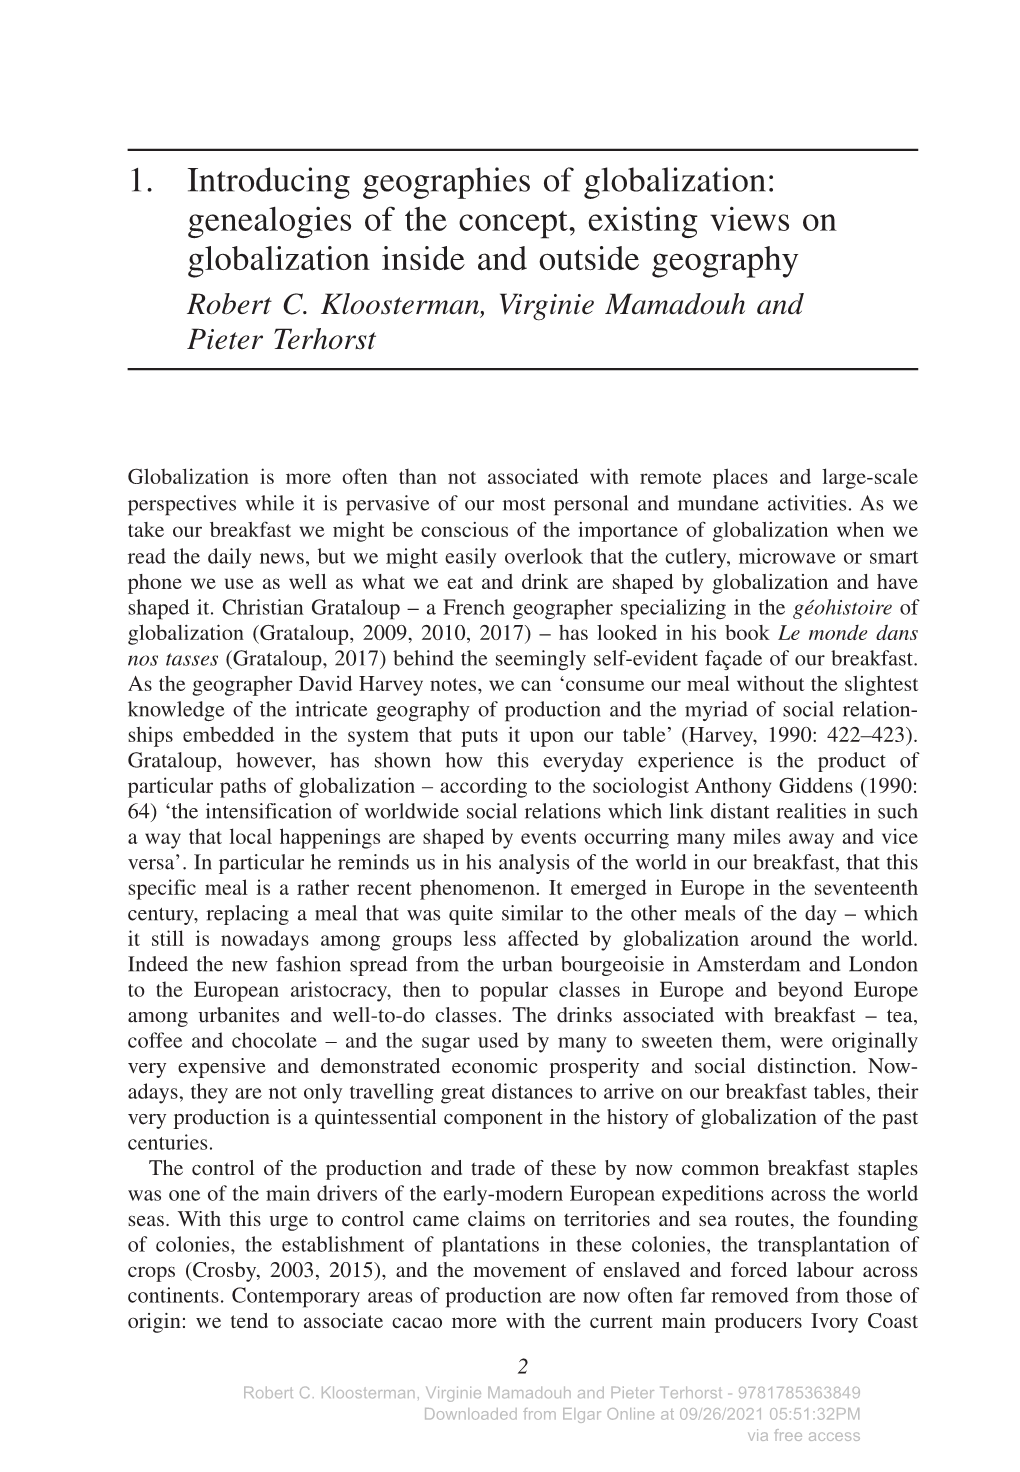 1. Introducing Geographies of Globalization: Genealogies of the Concept, Existing Views on Globalization Inside and Outside Geography Robert C